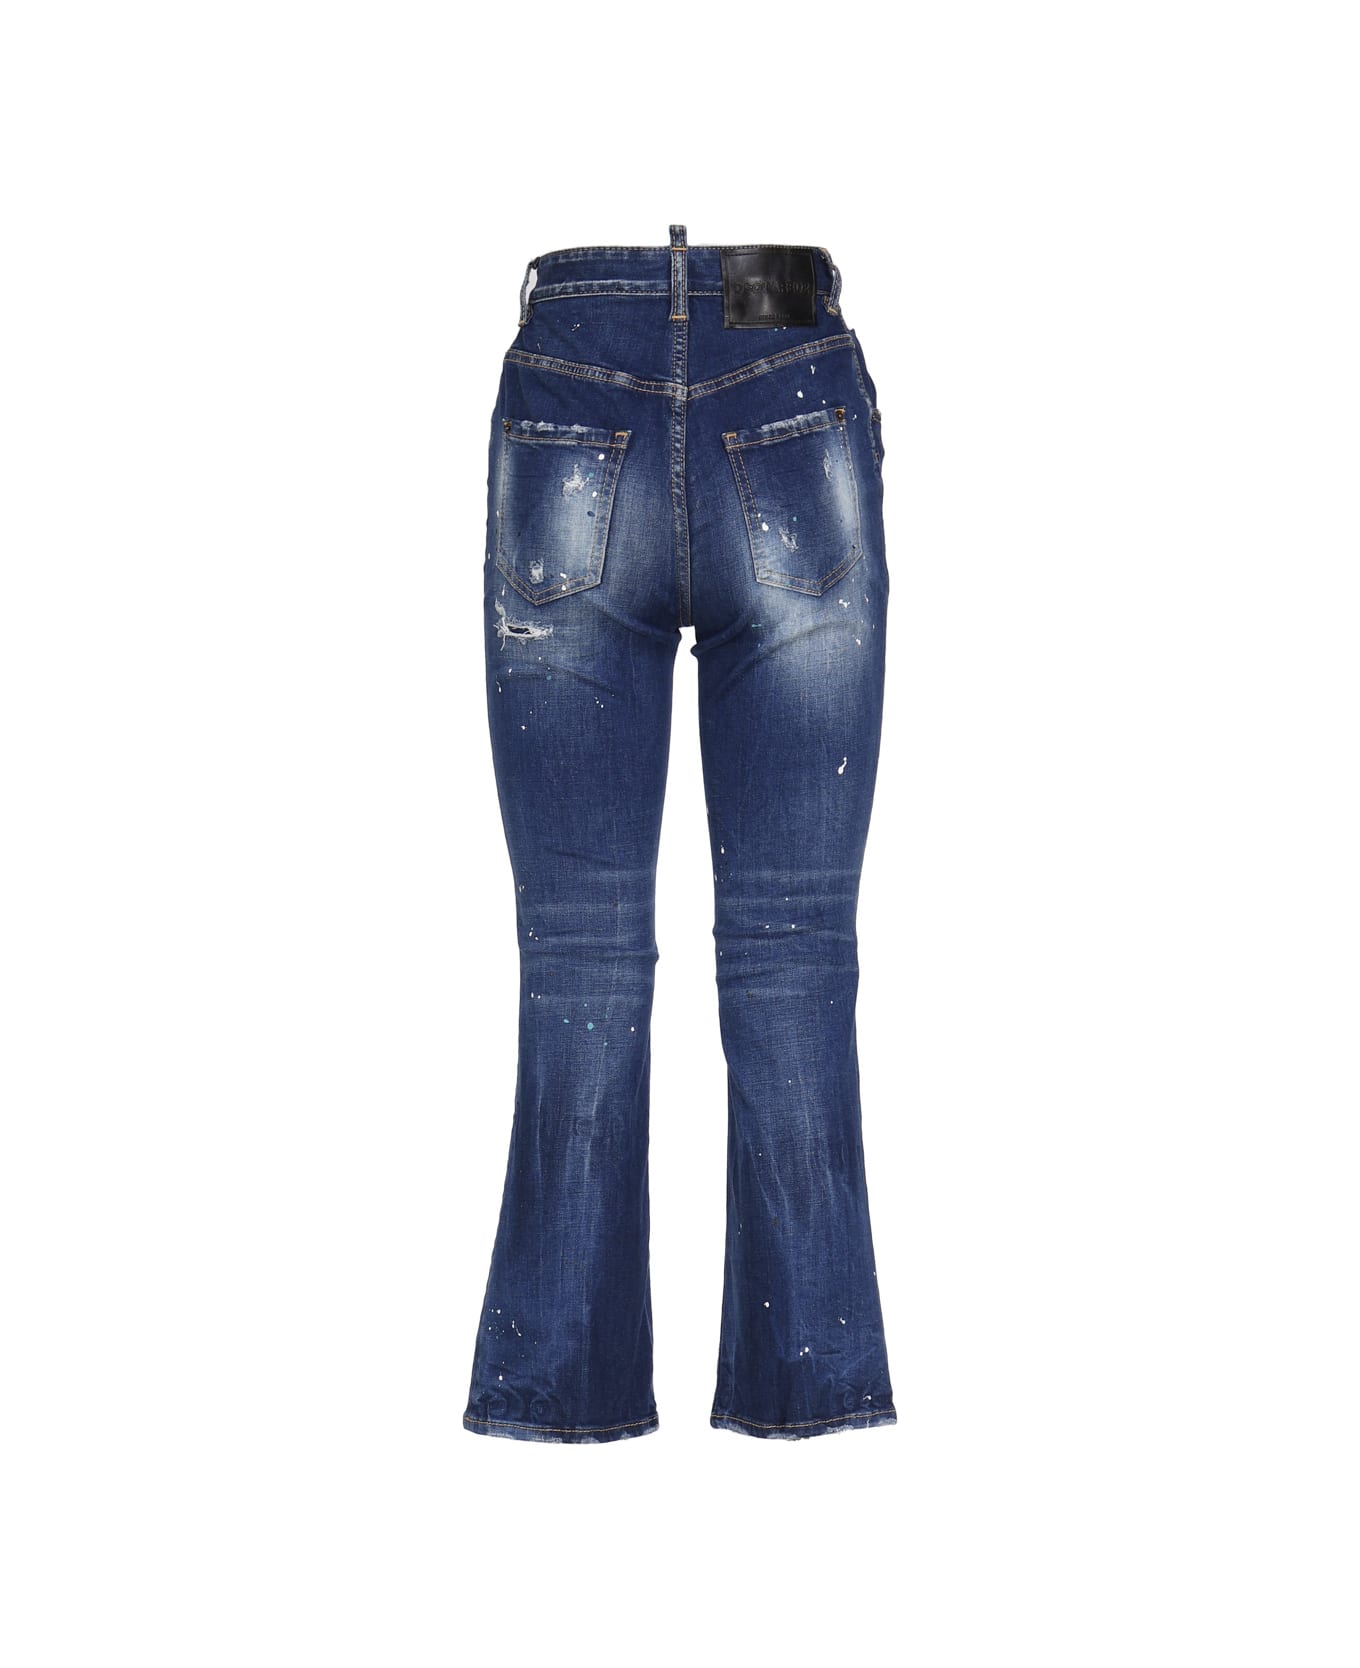 Dsquared2 Cropped Flared Jeans - Navy blue